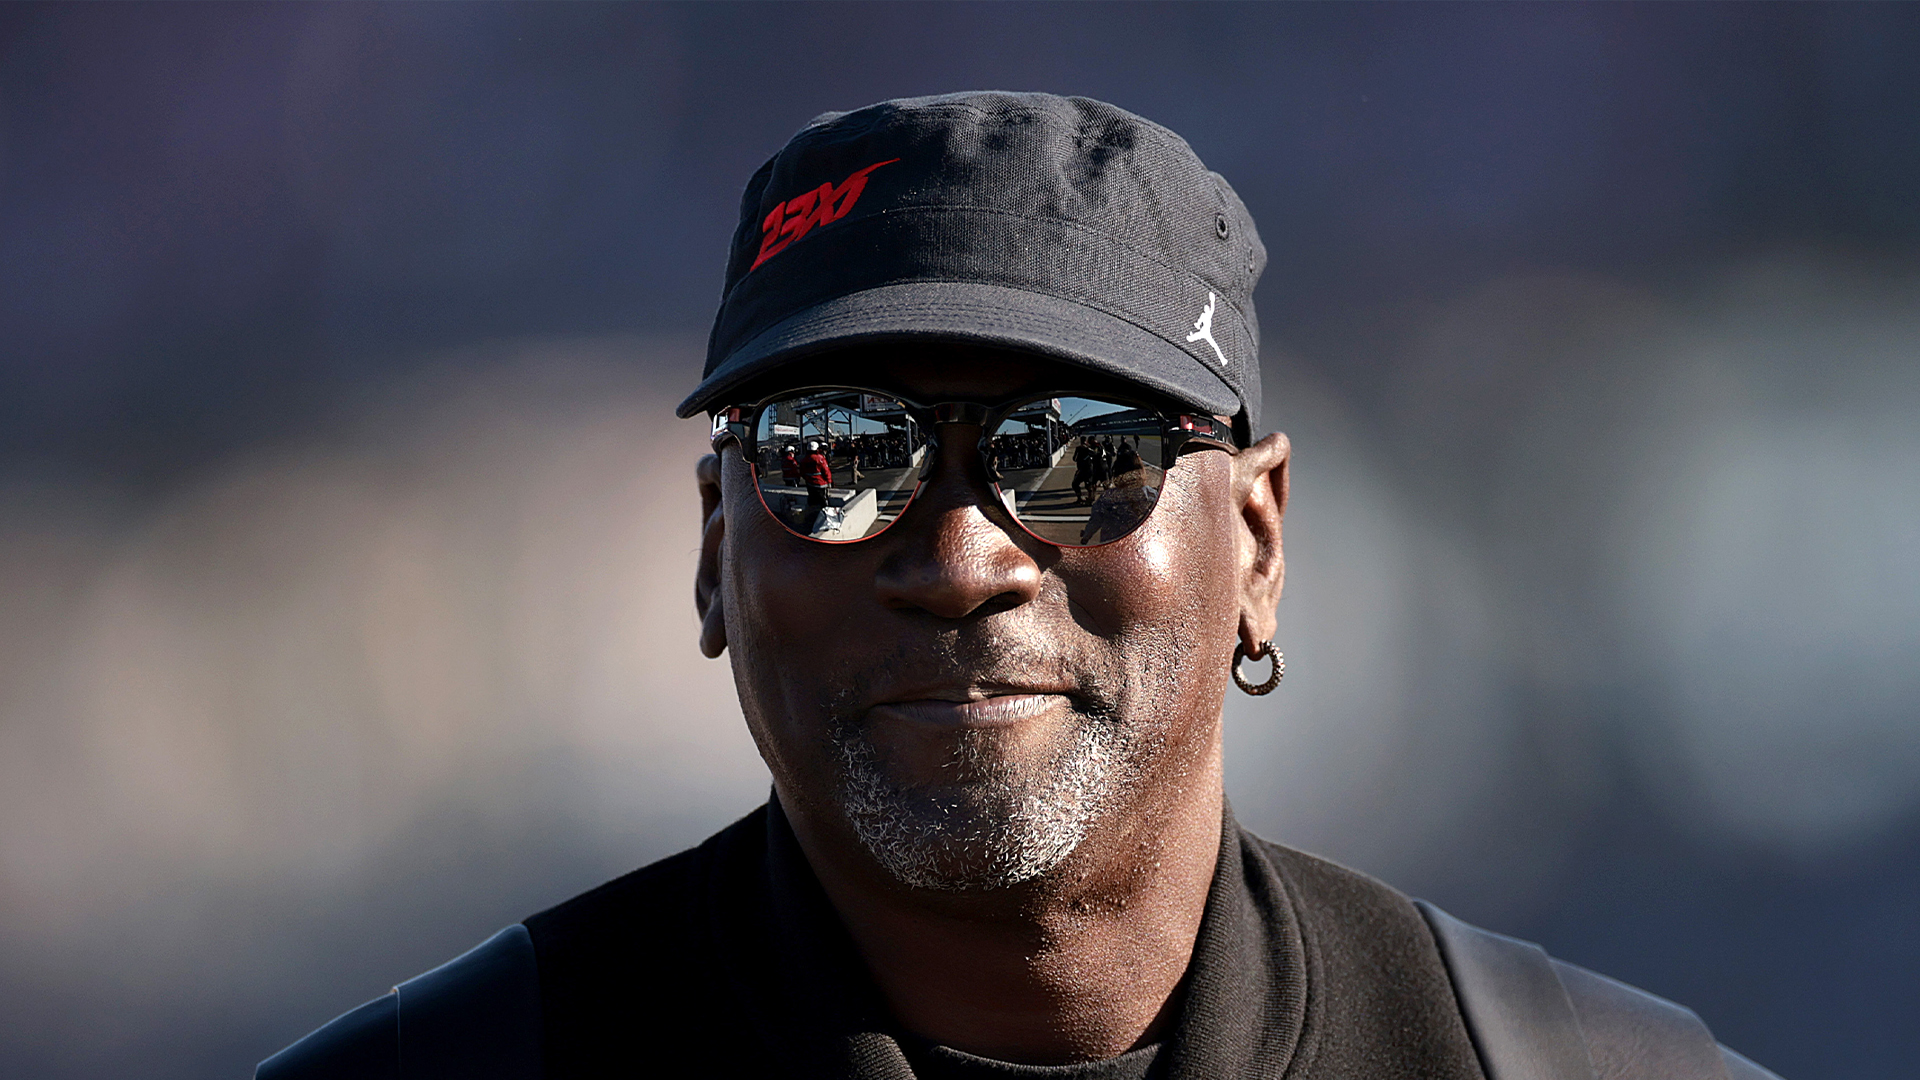 Michael Jordan’s Nascar career venture set to attract high-profile investors with NBA icon ‘passionate’ about sport [Video]